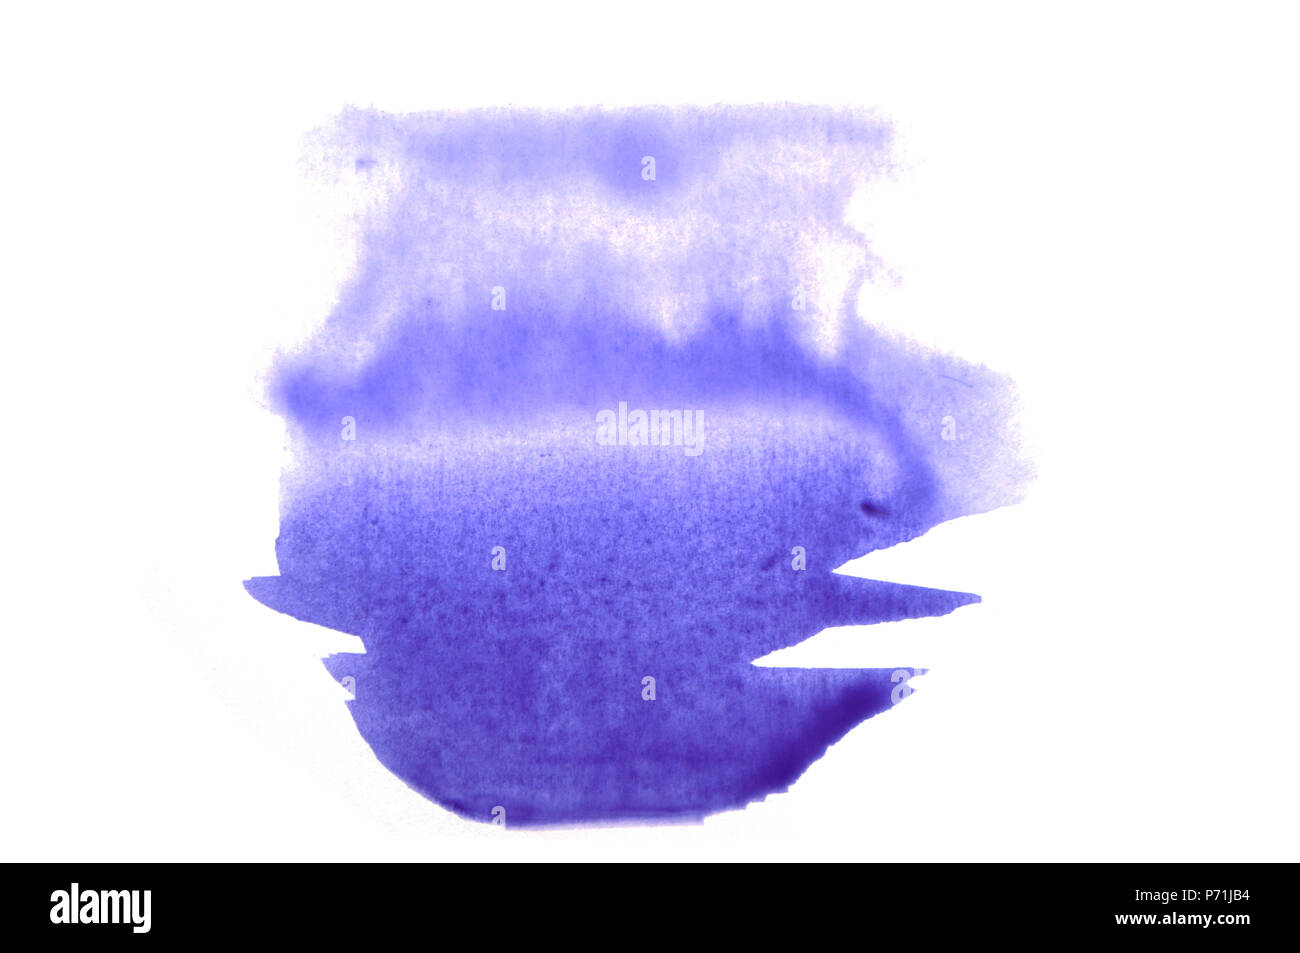 Violet watercolor stain isoalted on white background for your design. Stock Photo